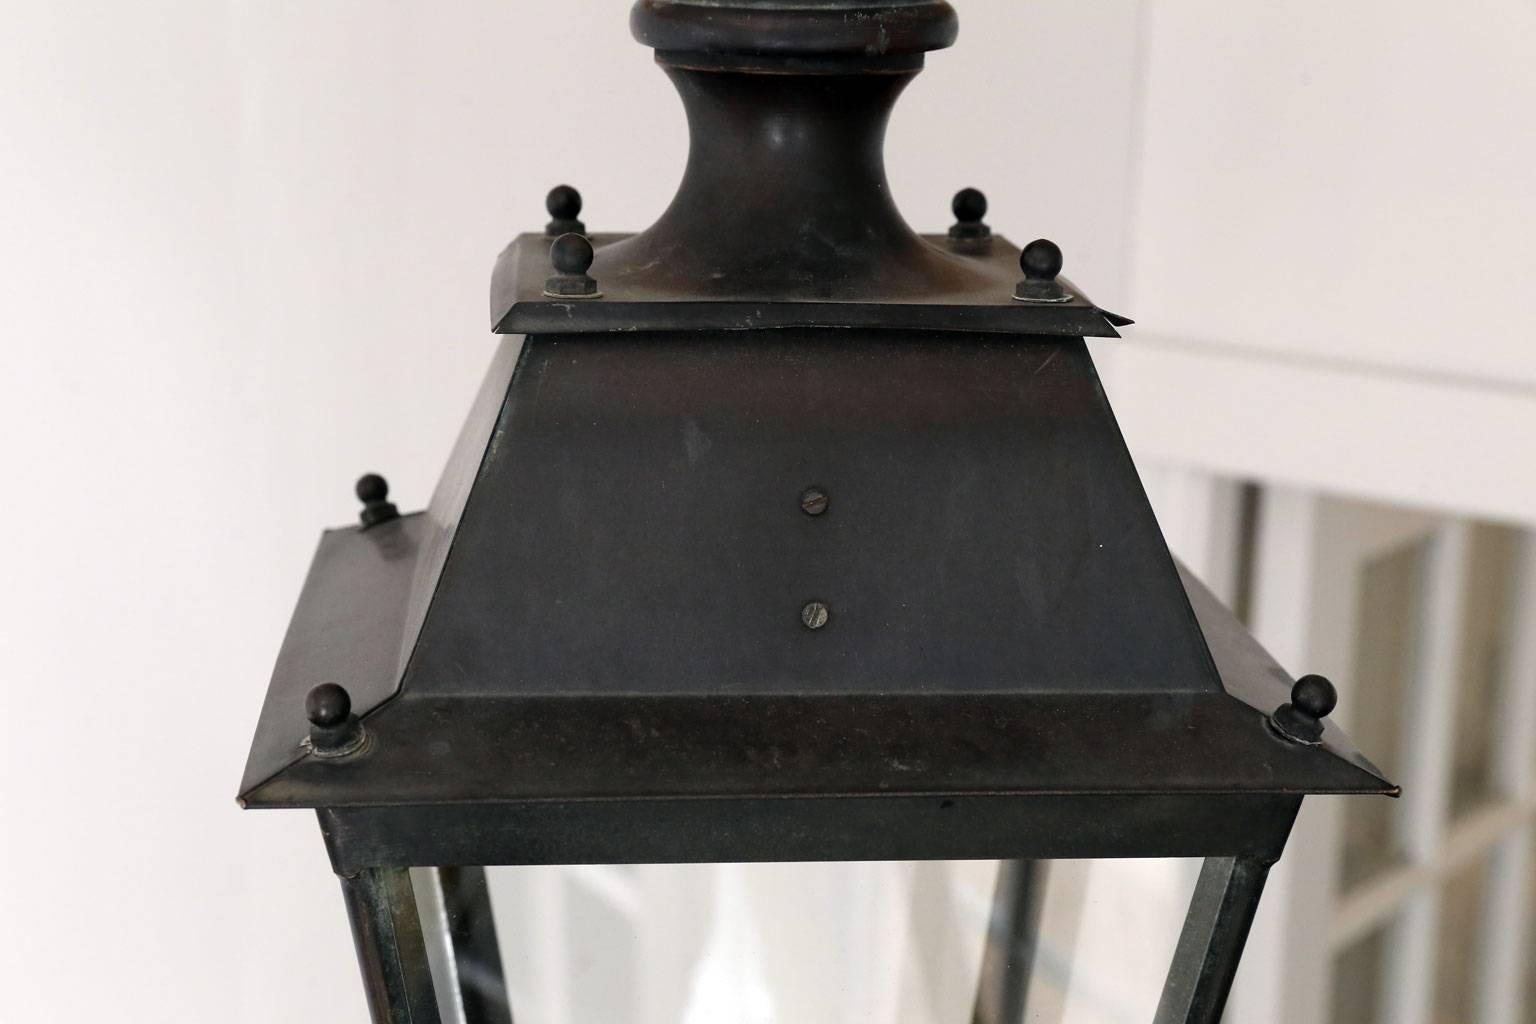 Pair of iron and copper lanterns (originally gas lanterns), can be wired for electricity, circa 1900, France. Each lantern sold individually at $3,800.